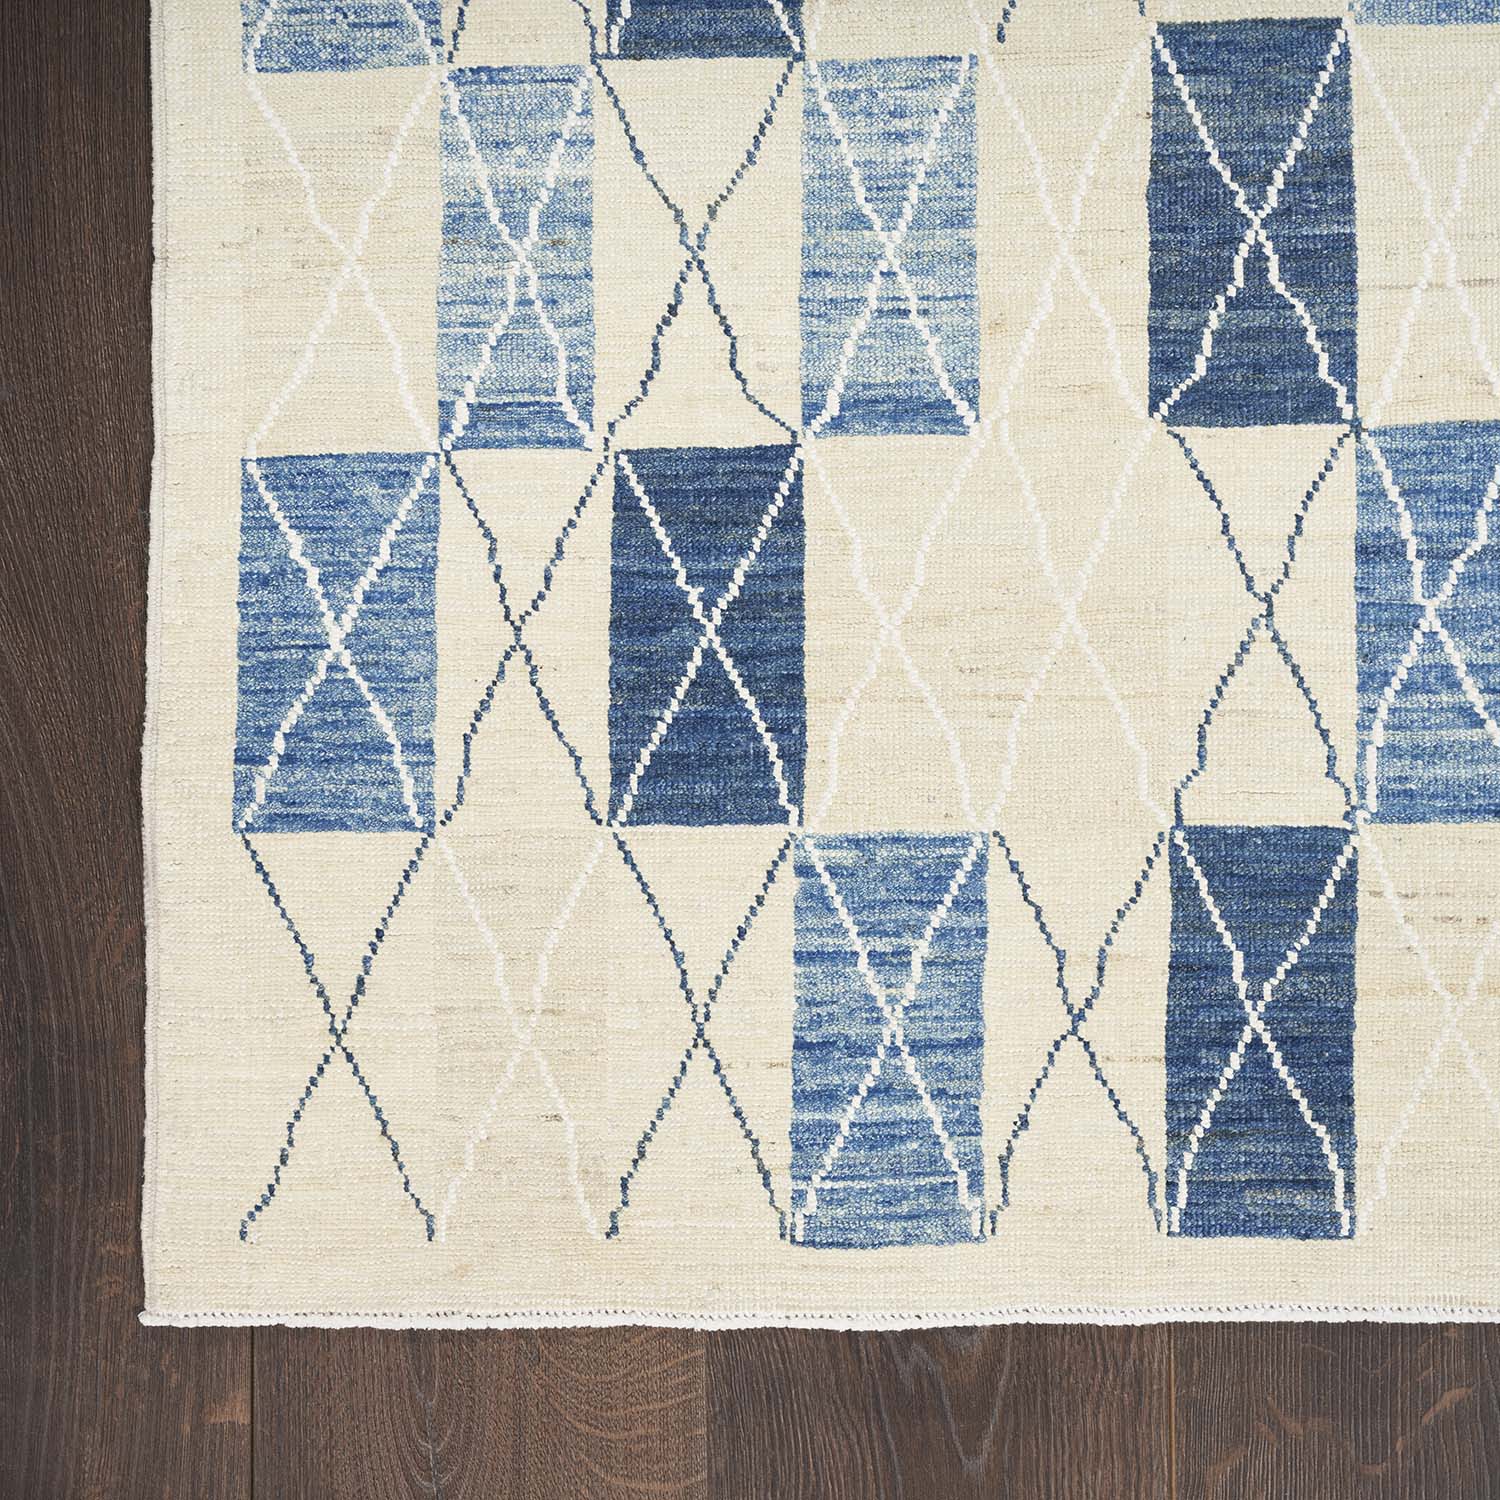 Abstract geometric rug with diamond shapes in blue on cream background